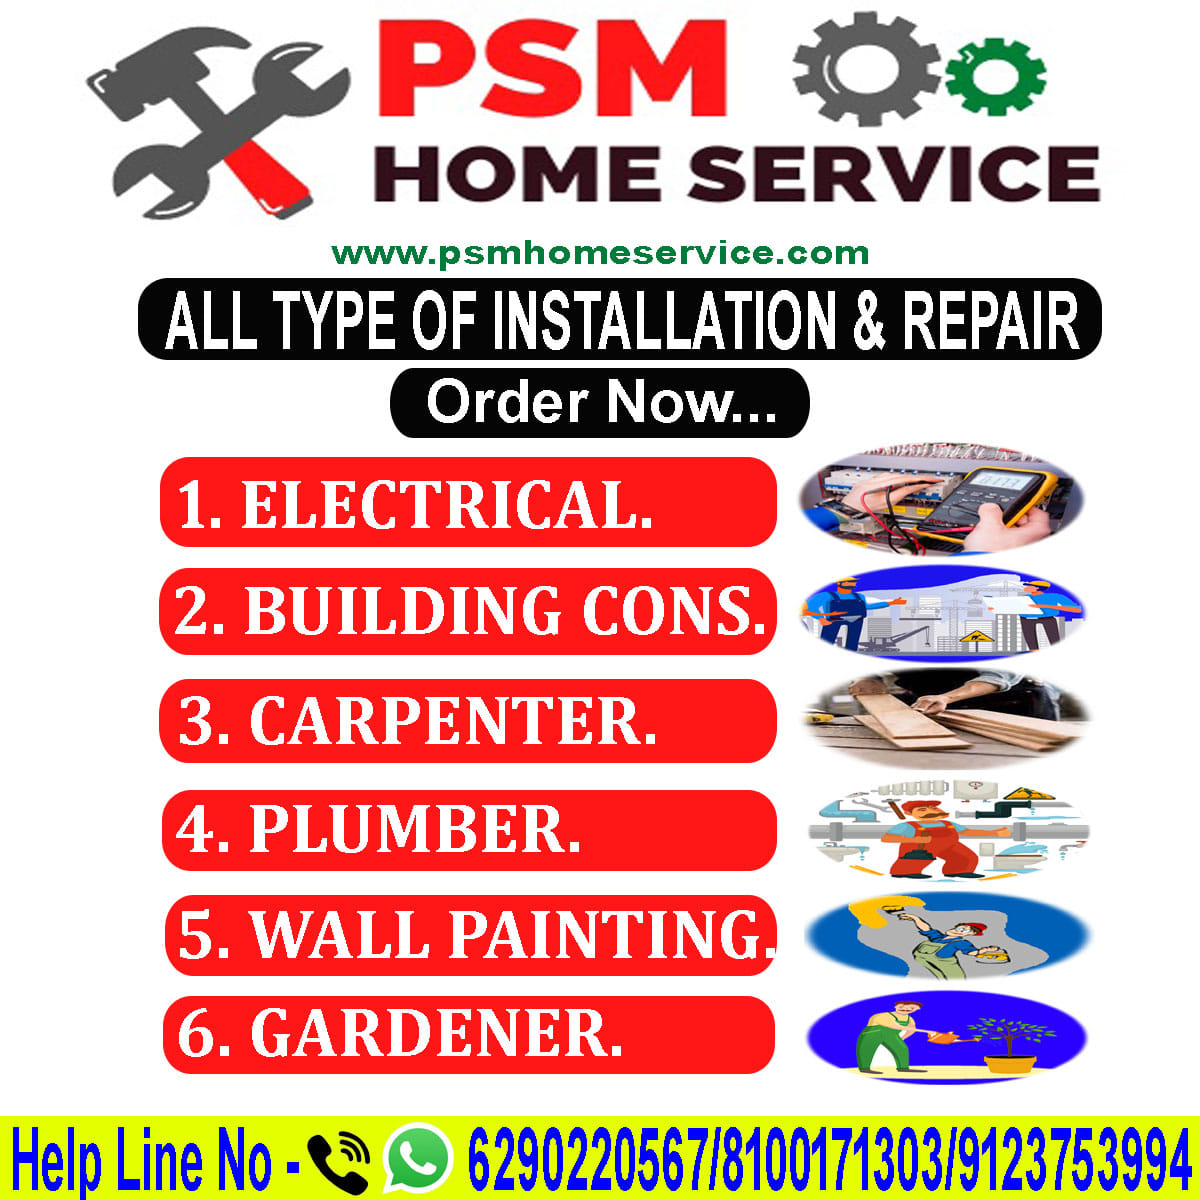 PSM Home Service